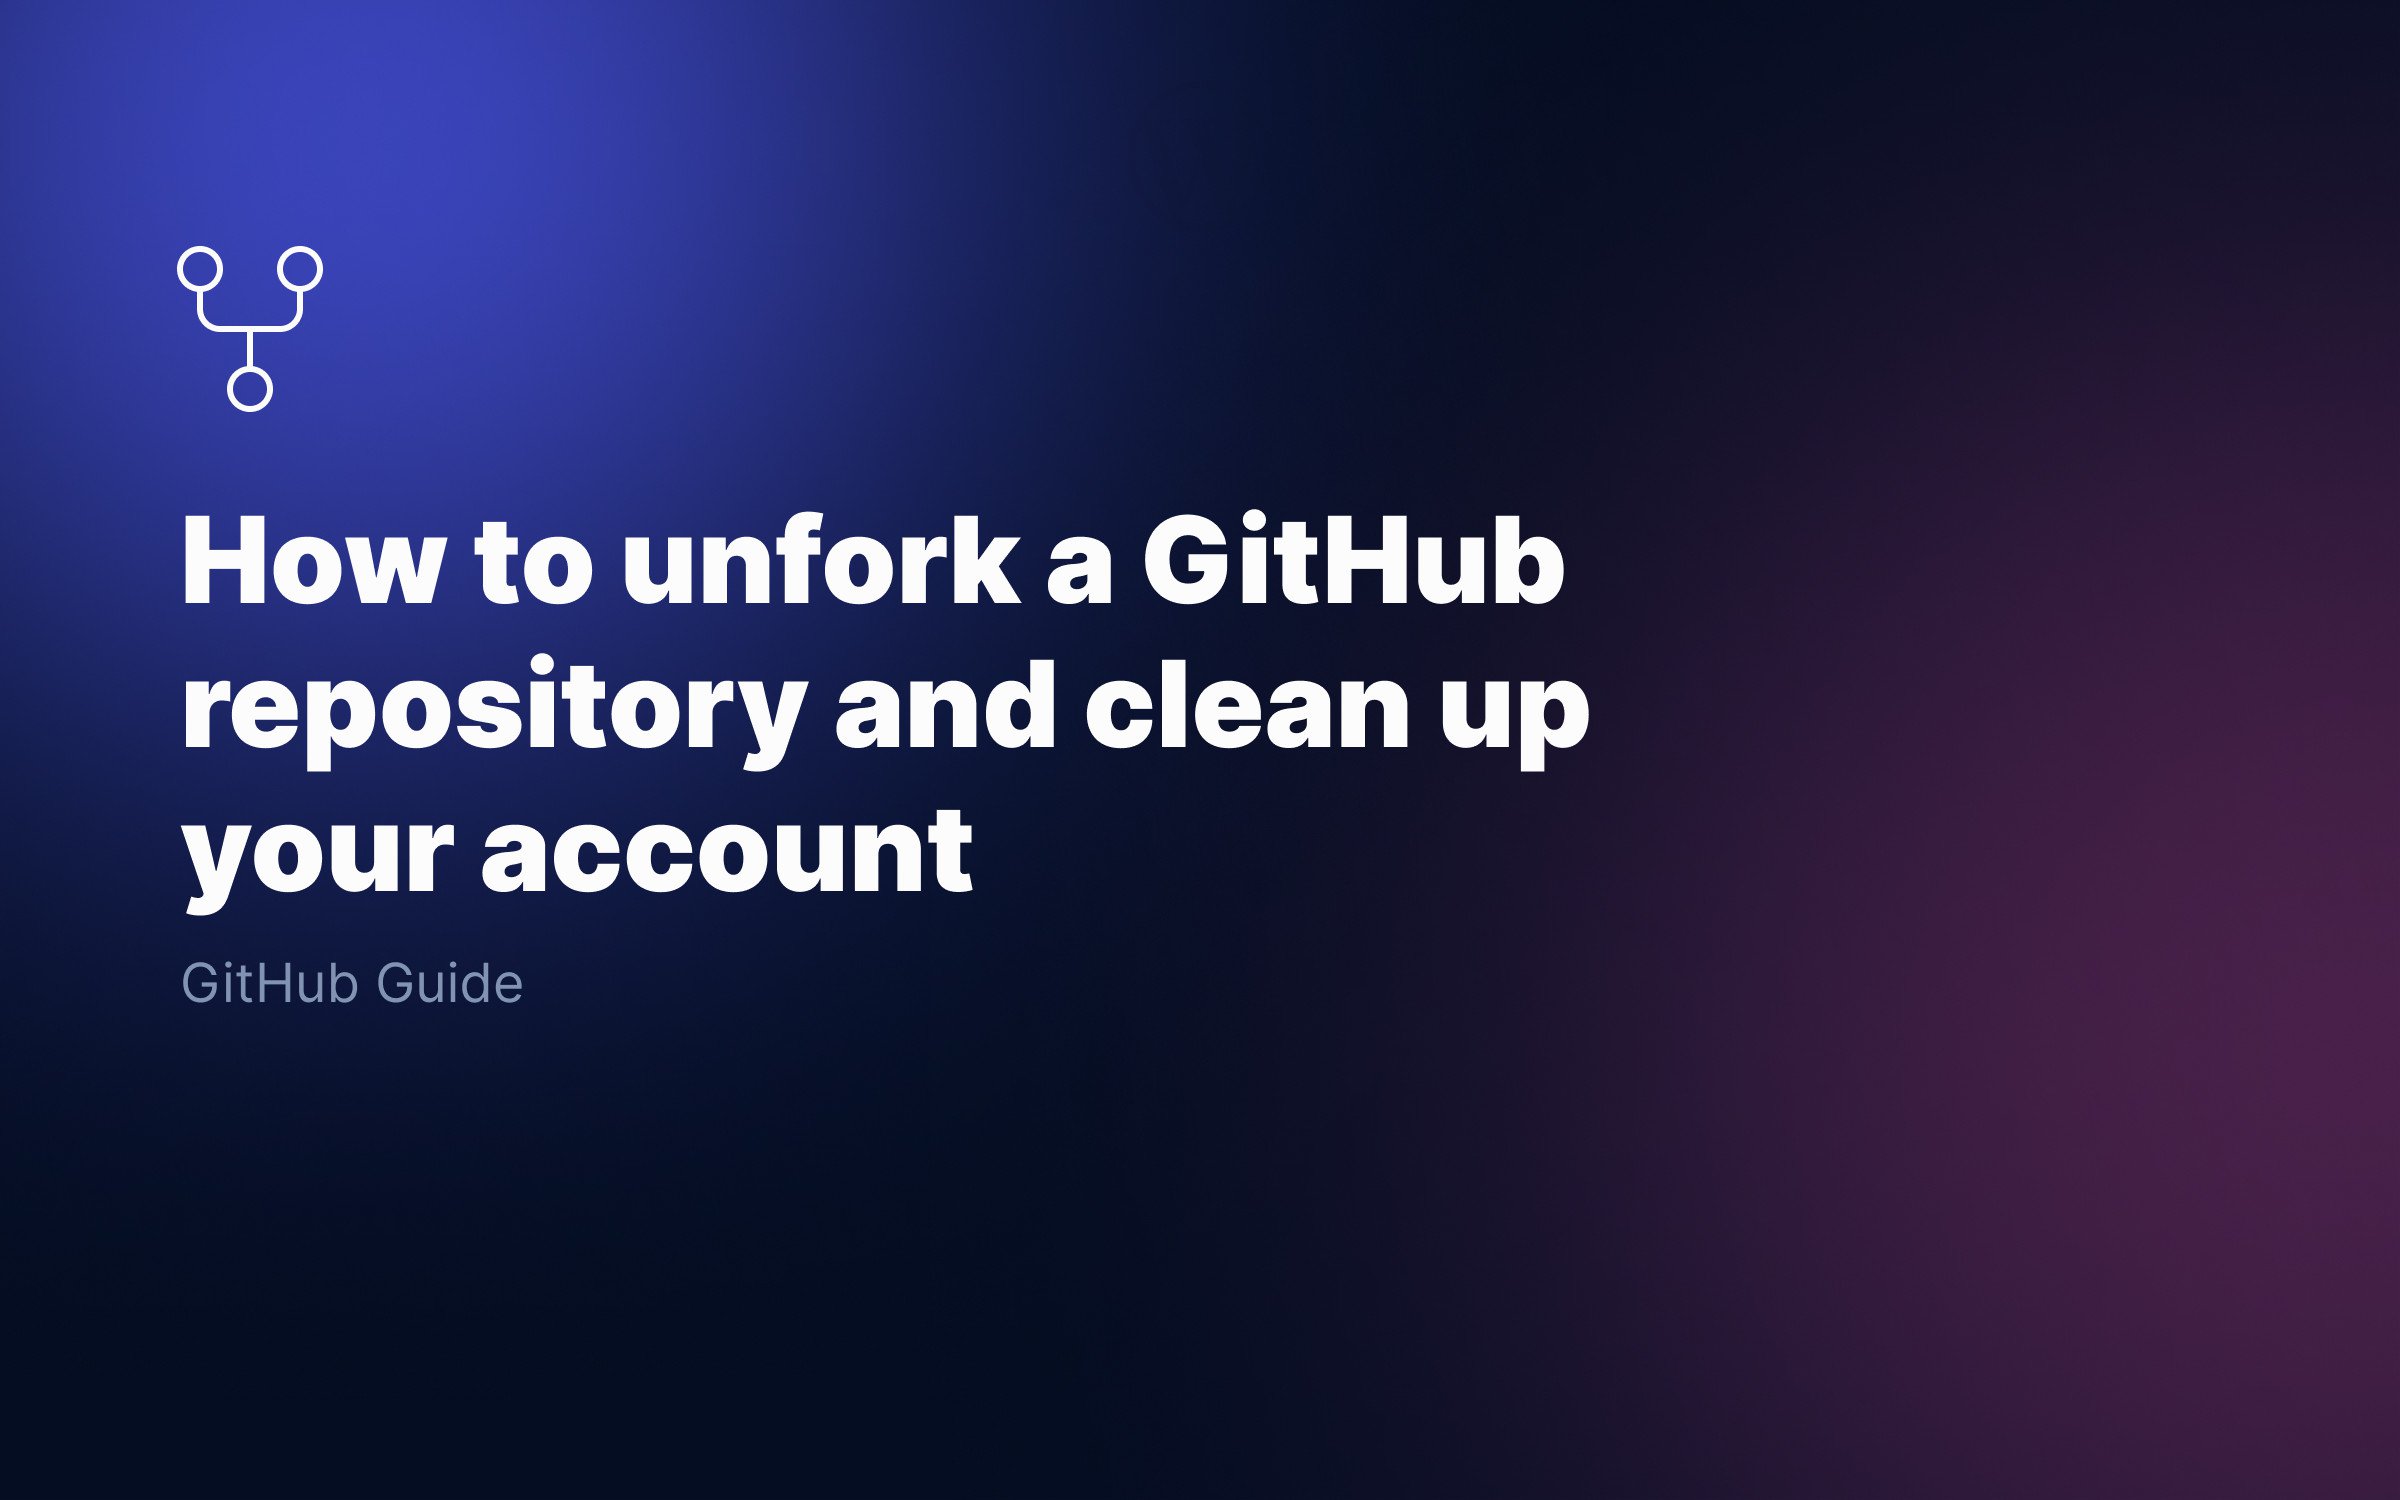 How to unfork a GitHub repository (2023 official method)